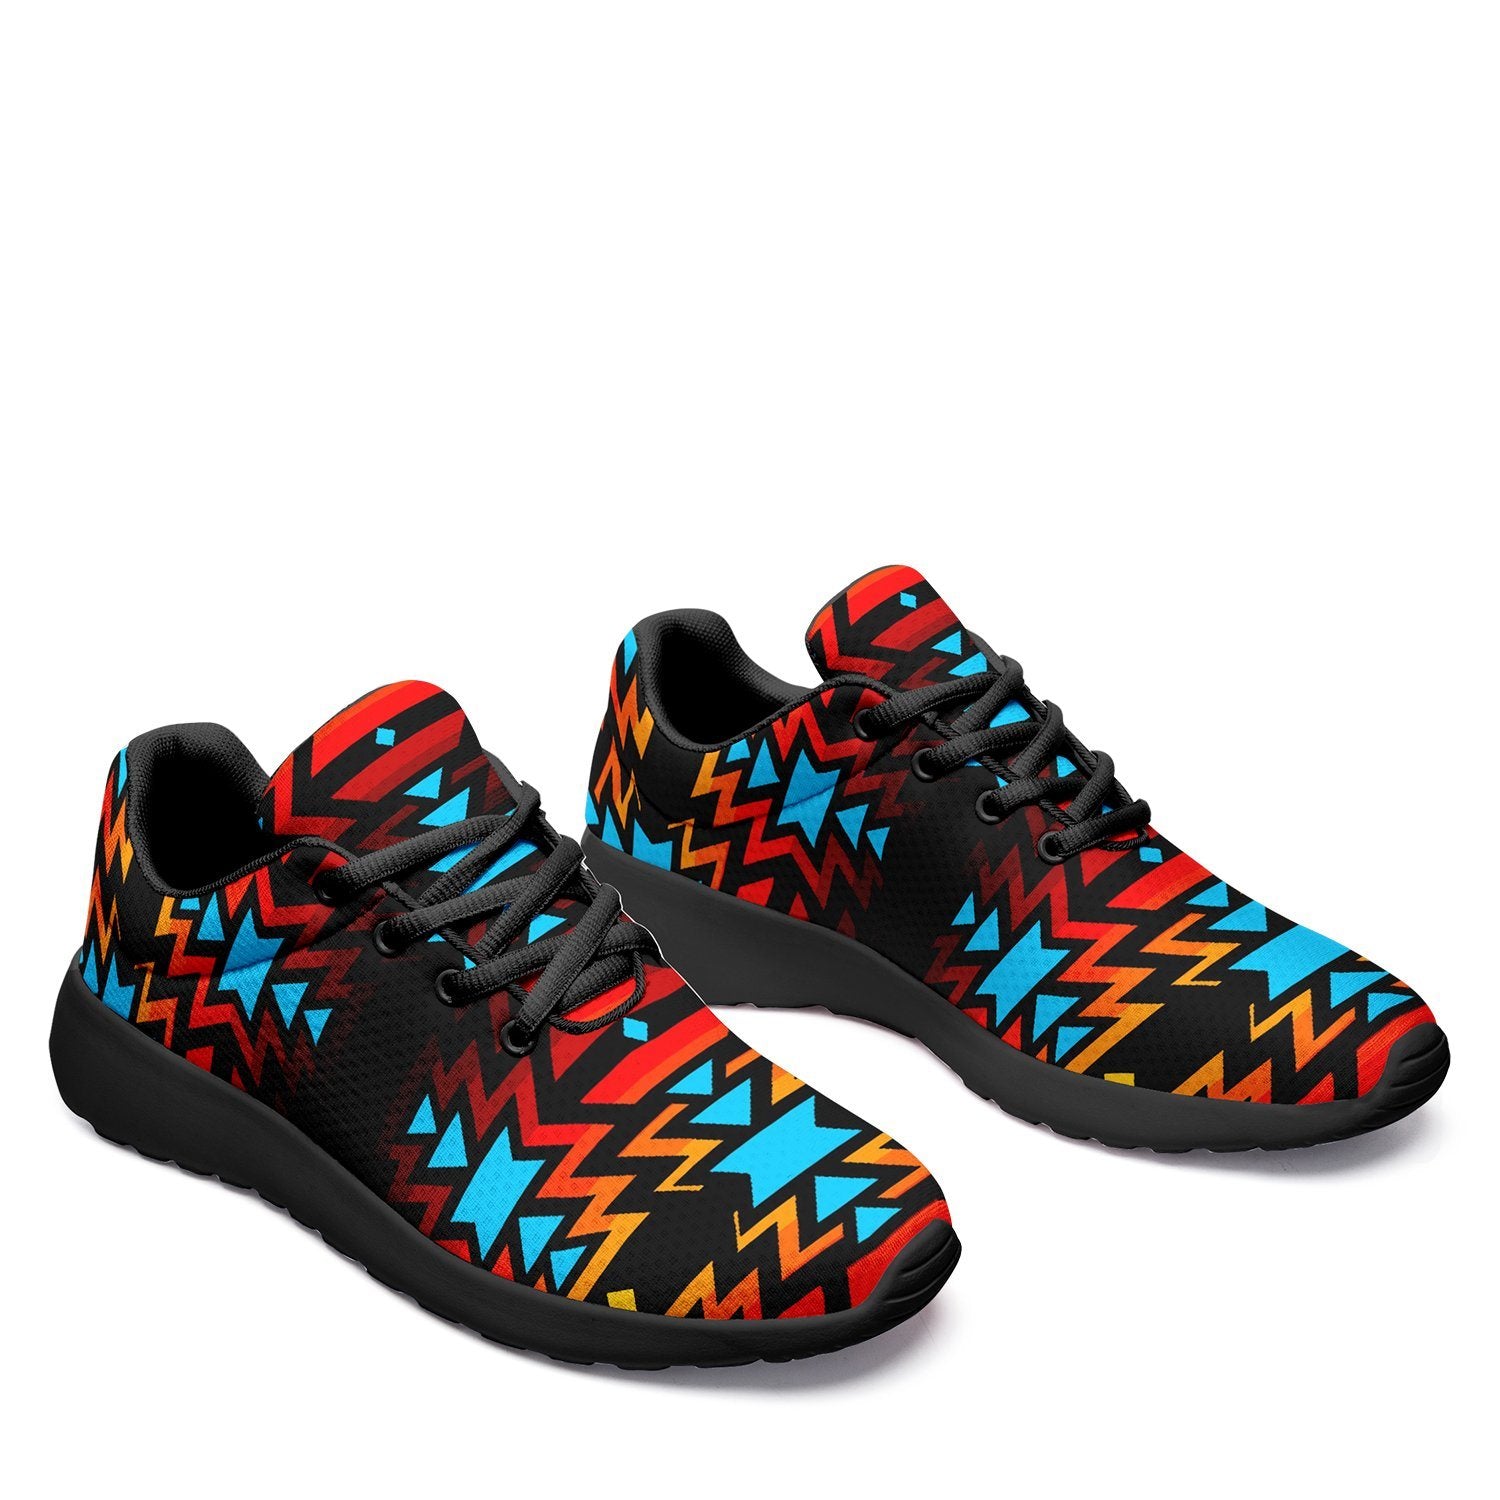 Black Fire and Turquoise Ikkaayi Sport Sneakers 49 Dzine 